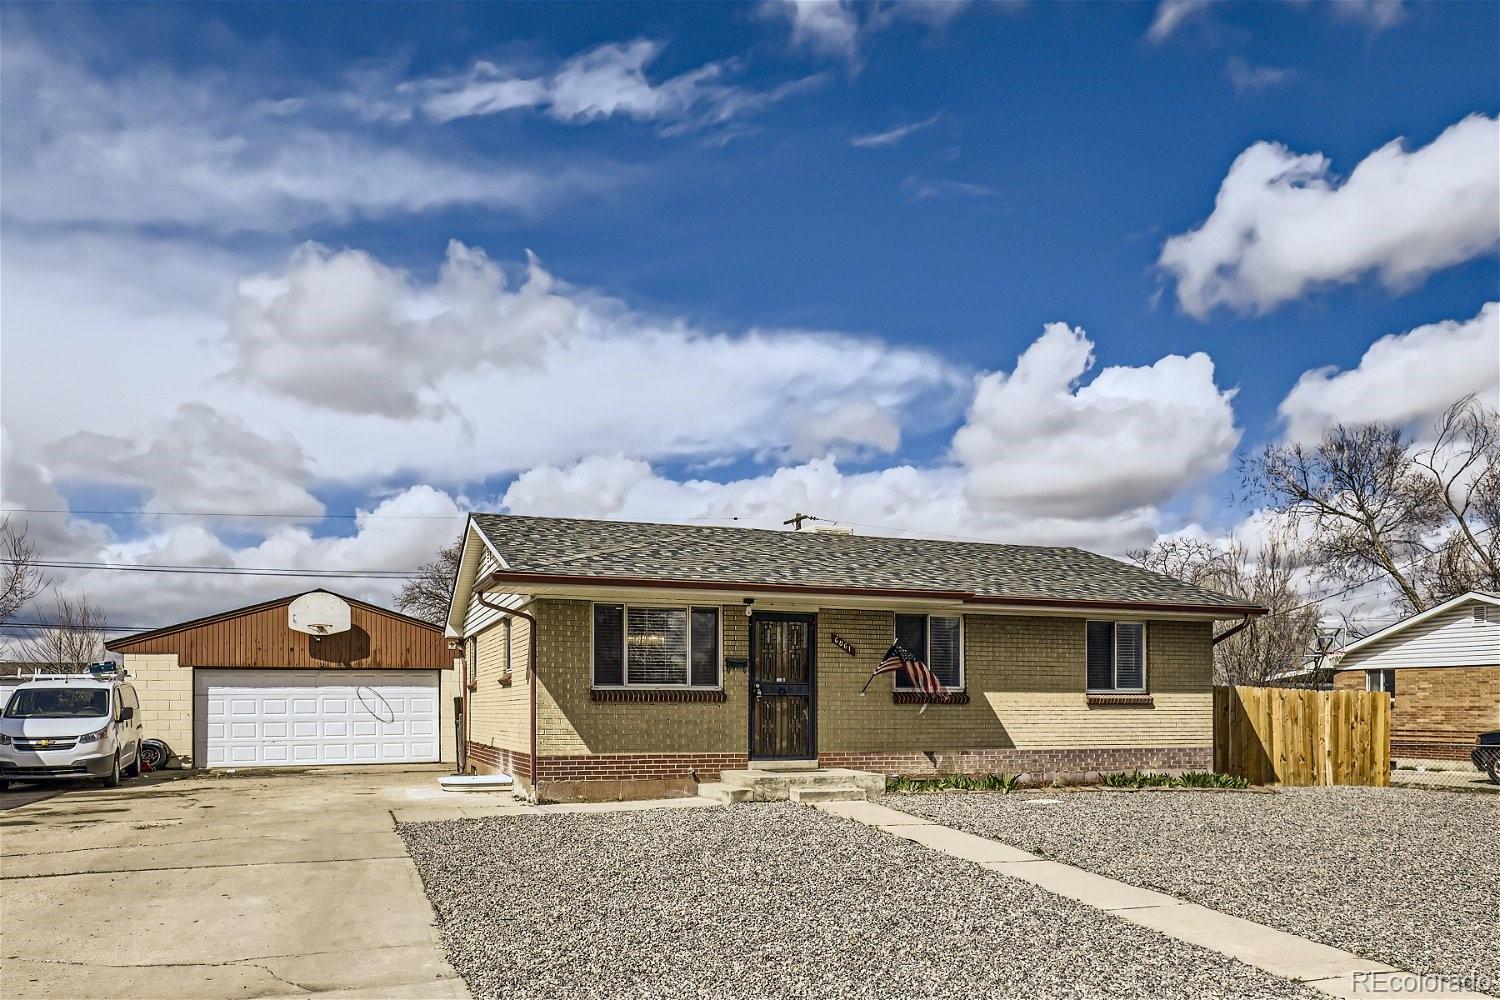 Report Image for 6861  Kearney Street,Commerce City, Colorado